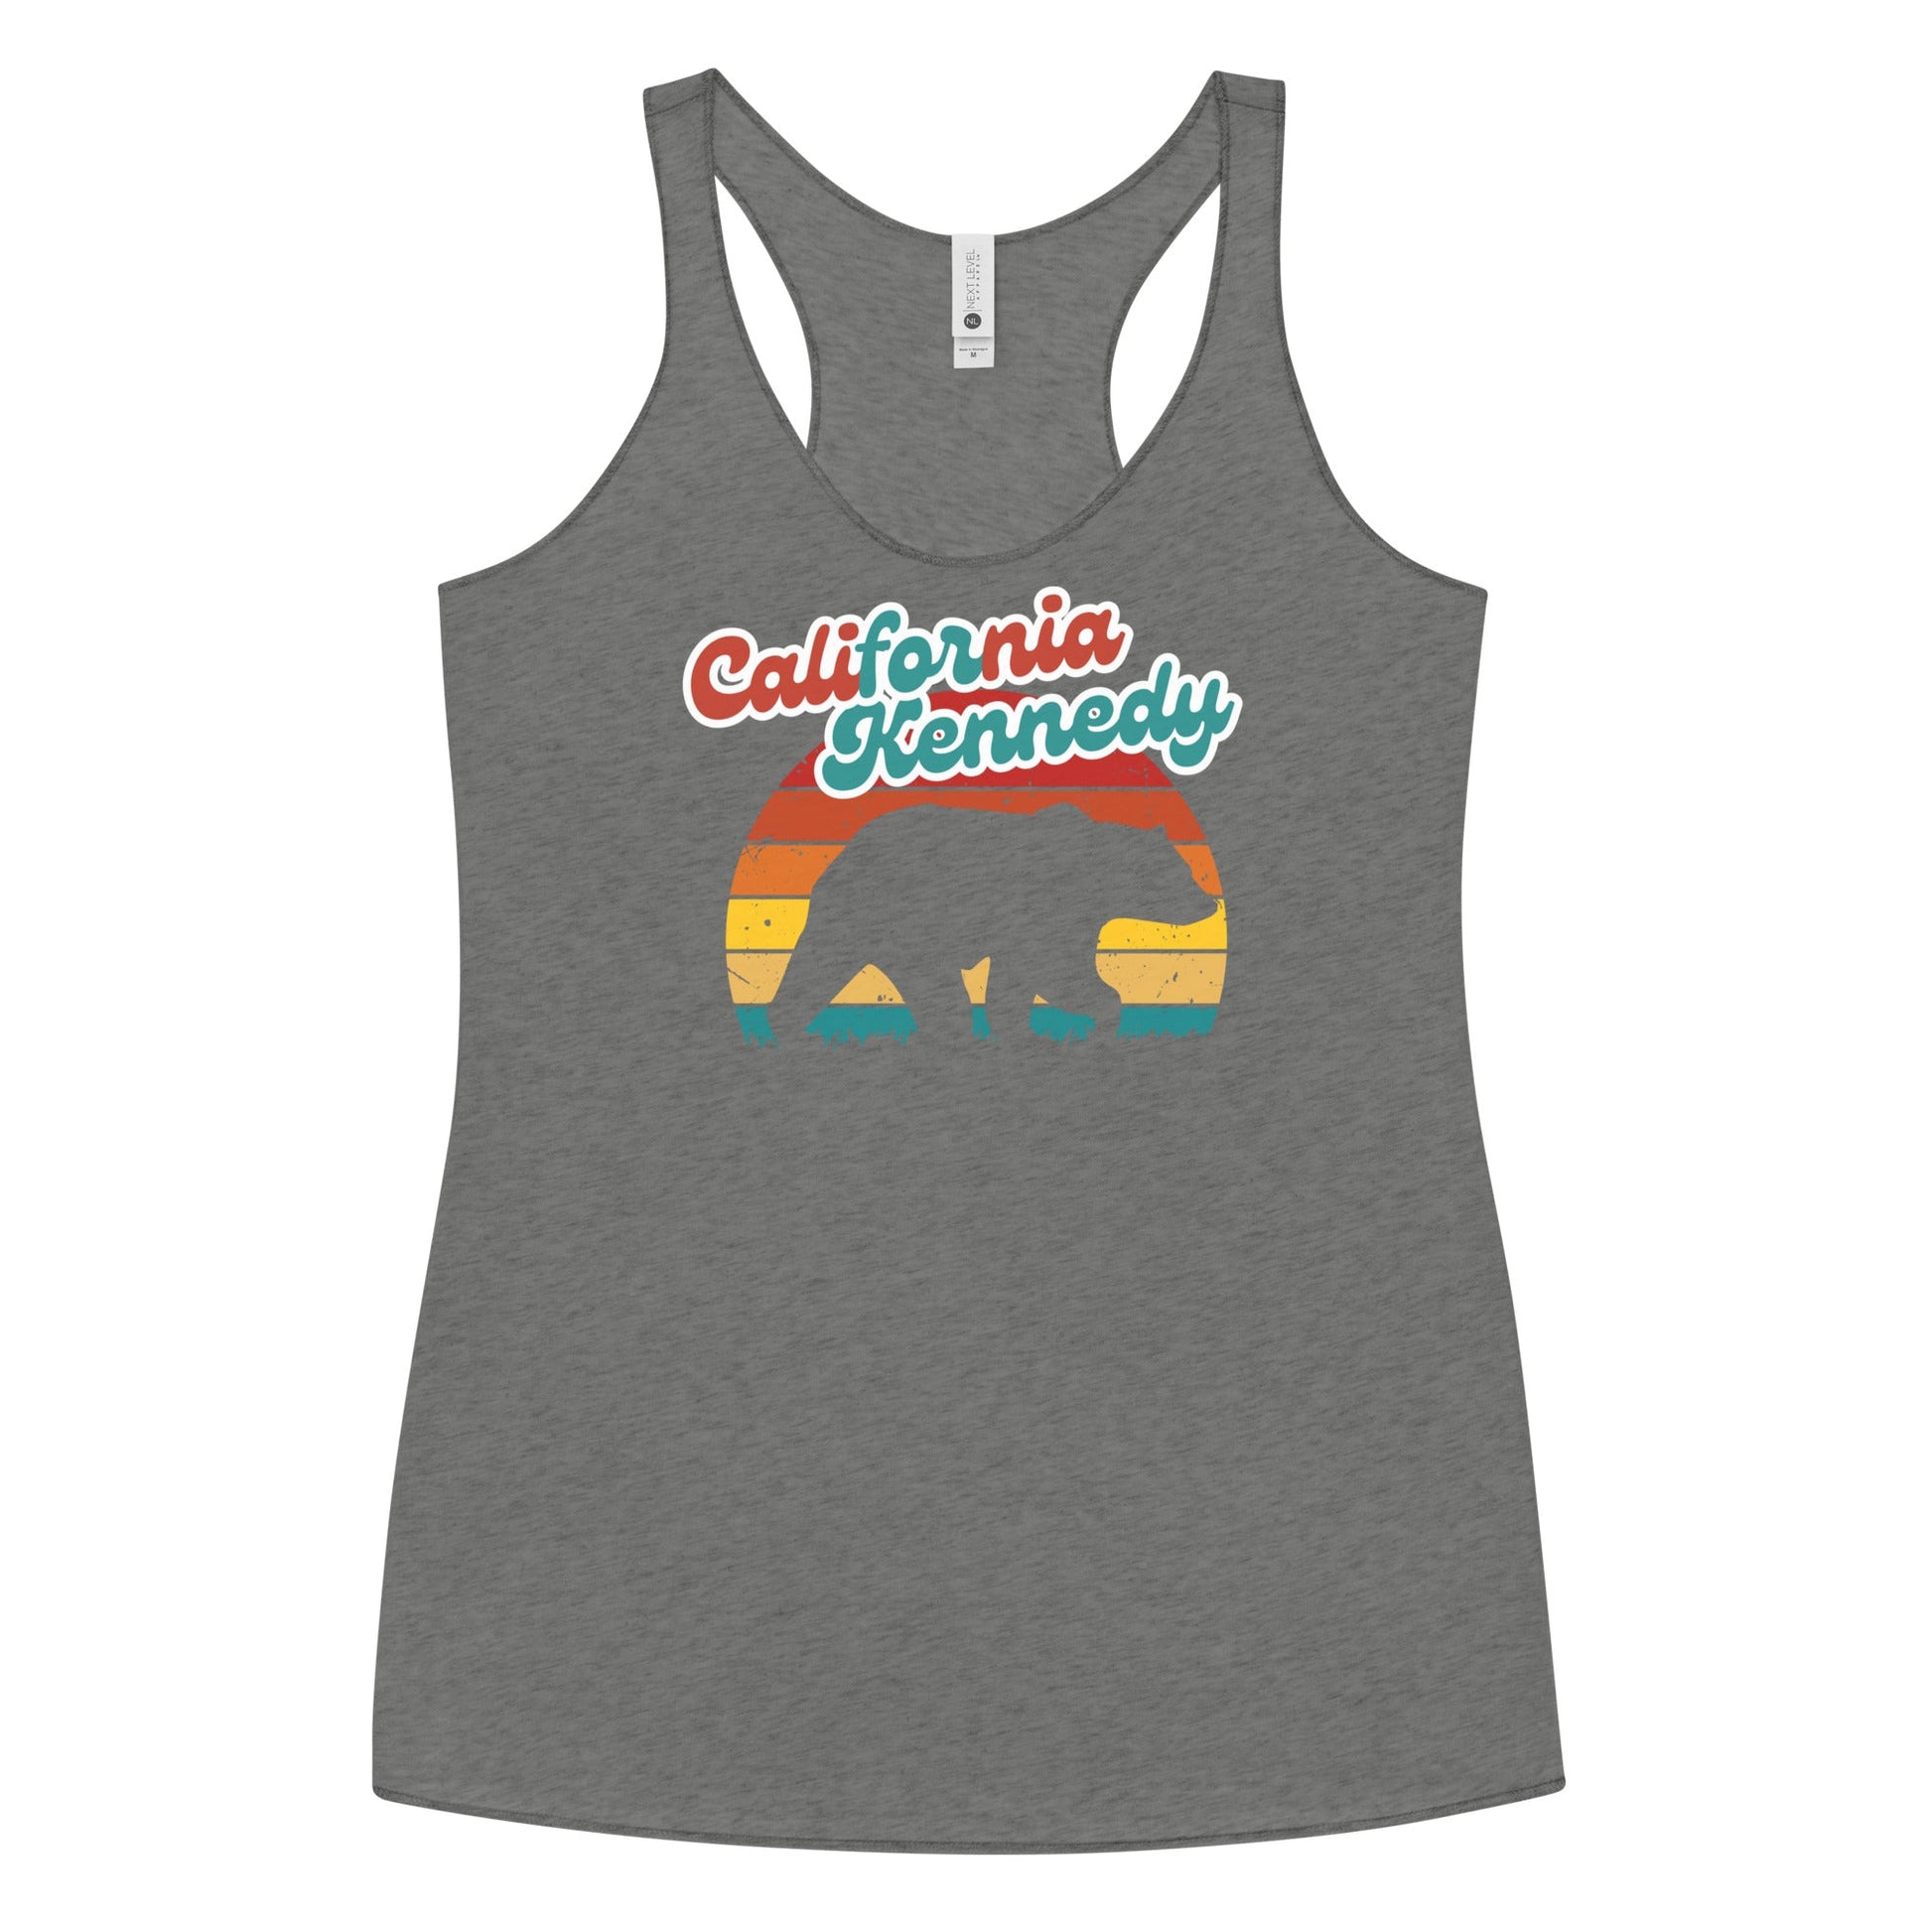 California for Kennedy Bear Women's Racerback Tank - TEAM KENNEDY. All rights reserved